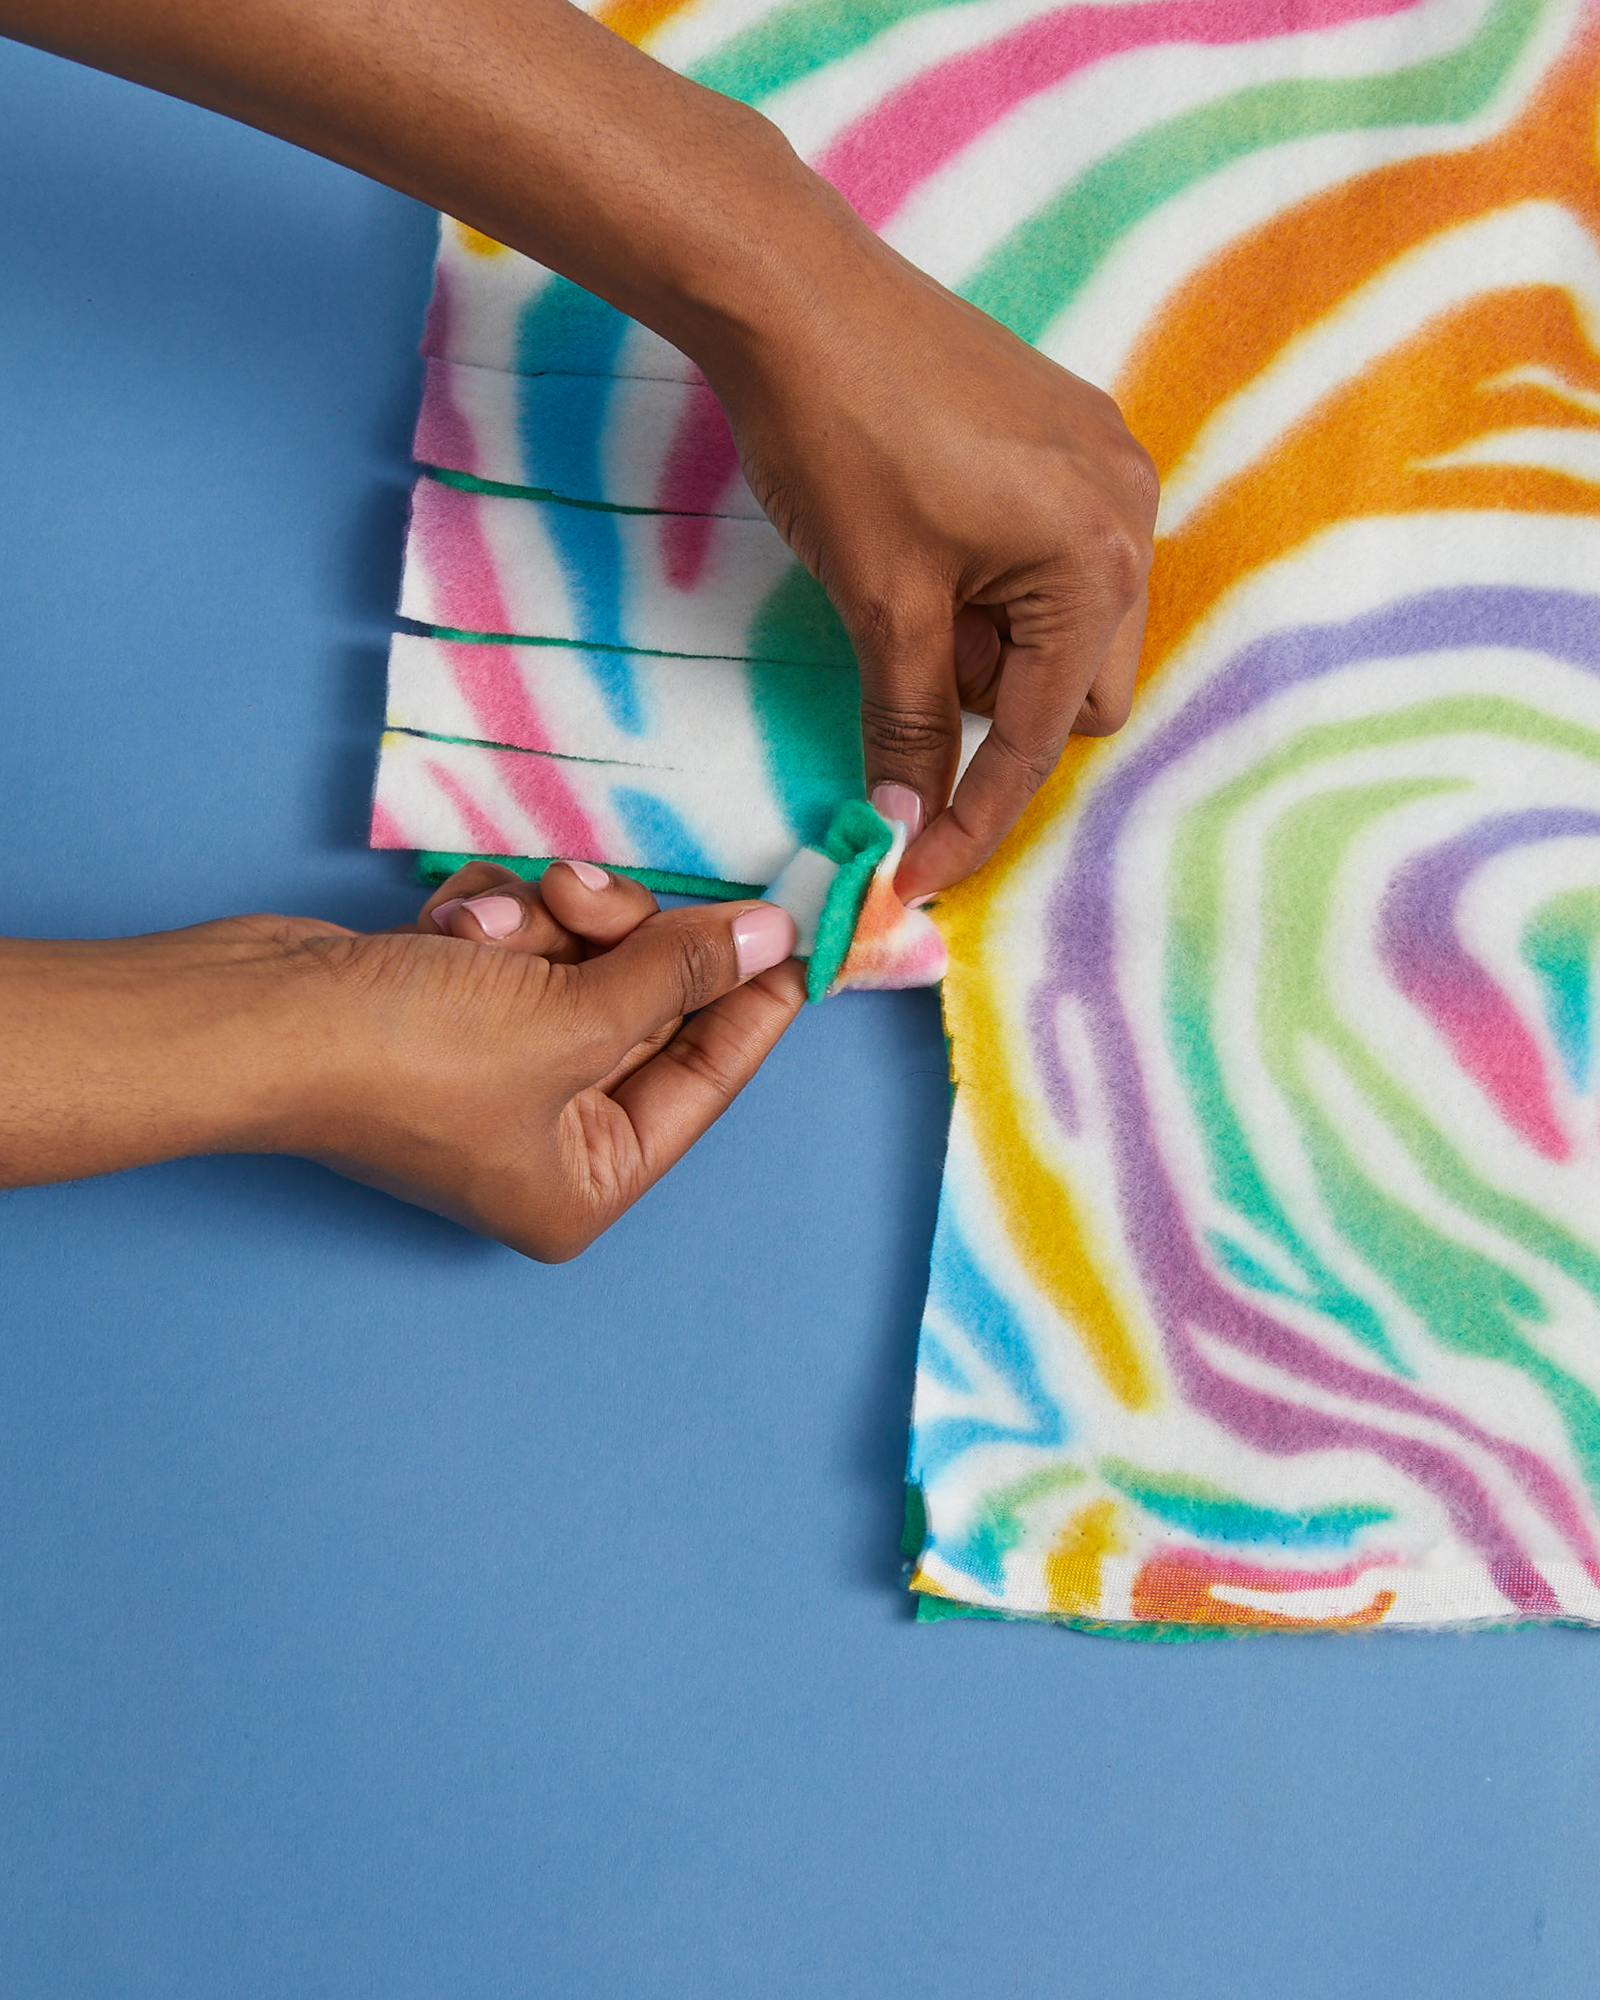 How to Make a Fleece Tie Blanket The Ultimate Guide 